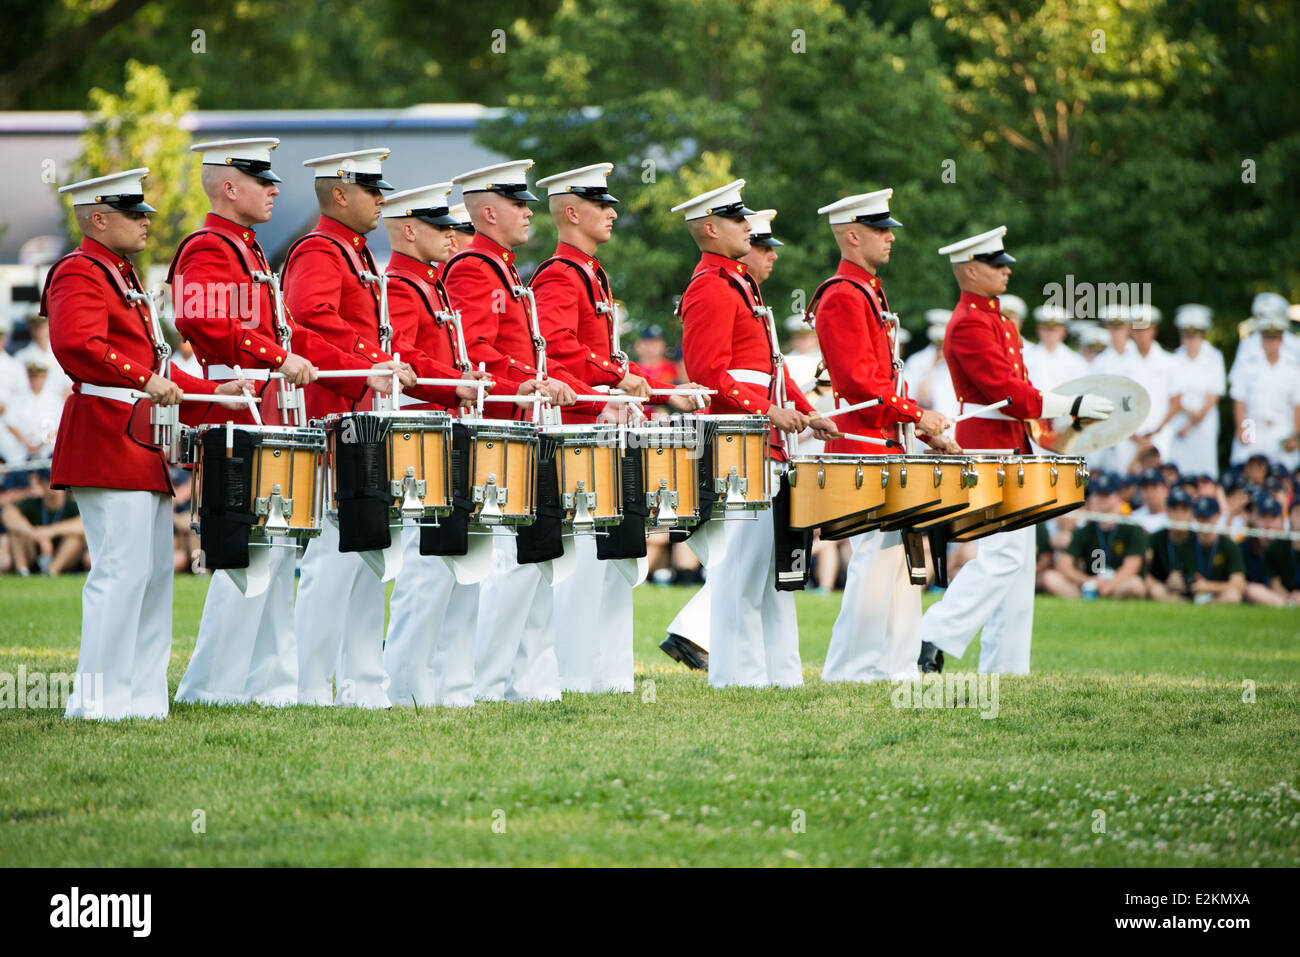 The United States Marine Drum and Bugle Corps, known as the Commandant's Own, performs at the Sunset Parade at the Iwo Jima Memorial in Arlington, Virginia, next to Arlington National Cemetery. Stock Photo